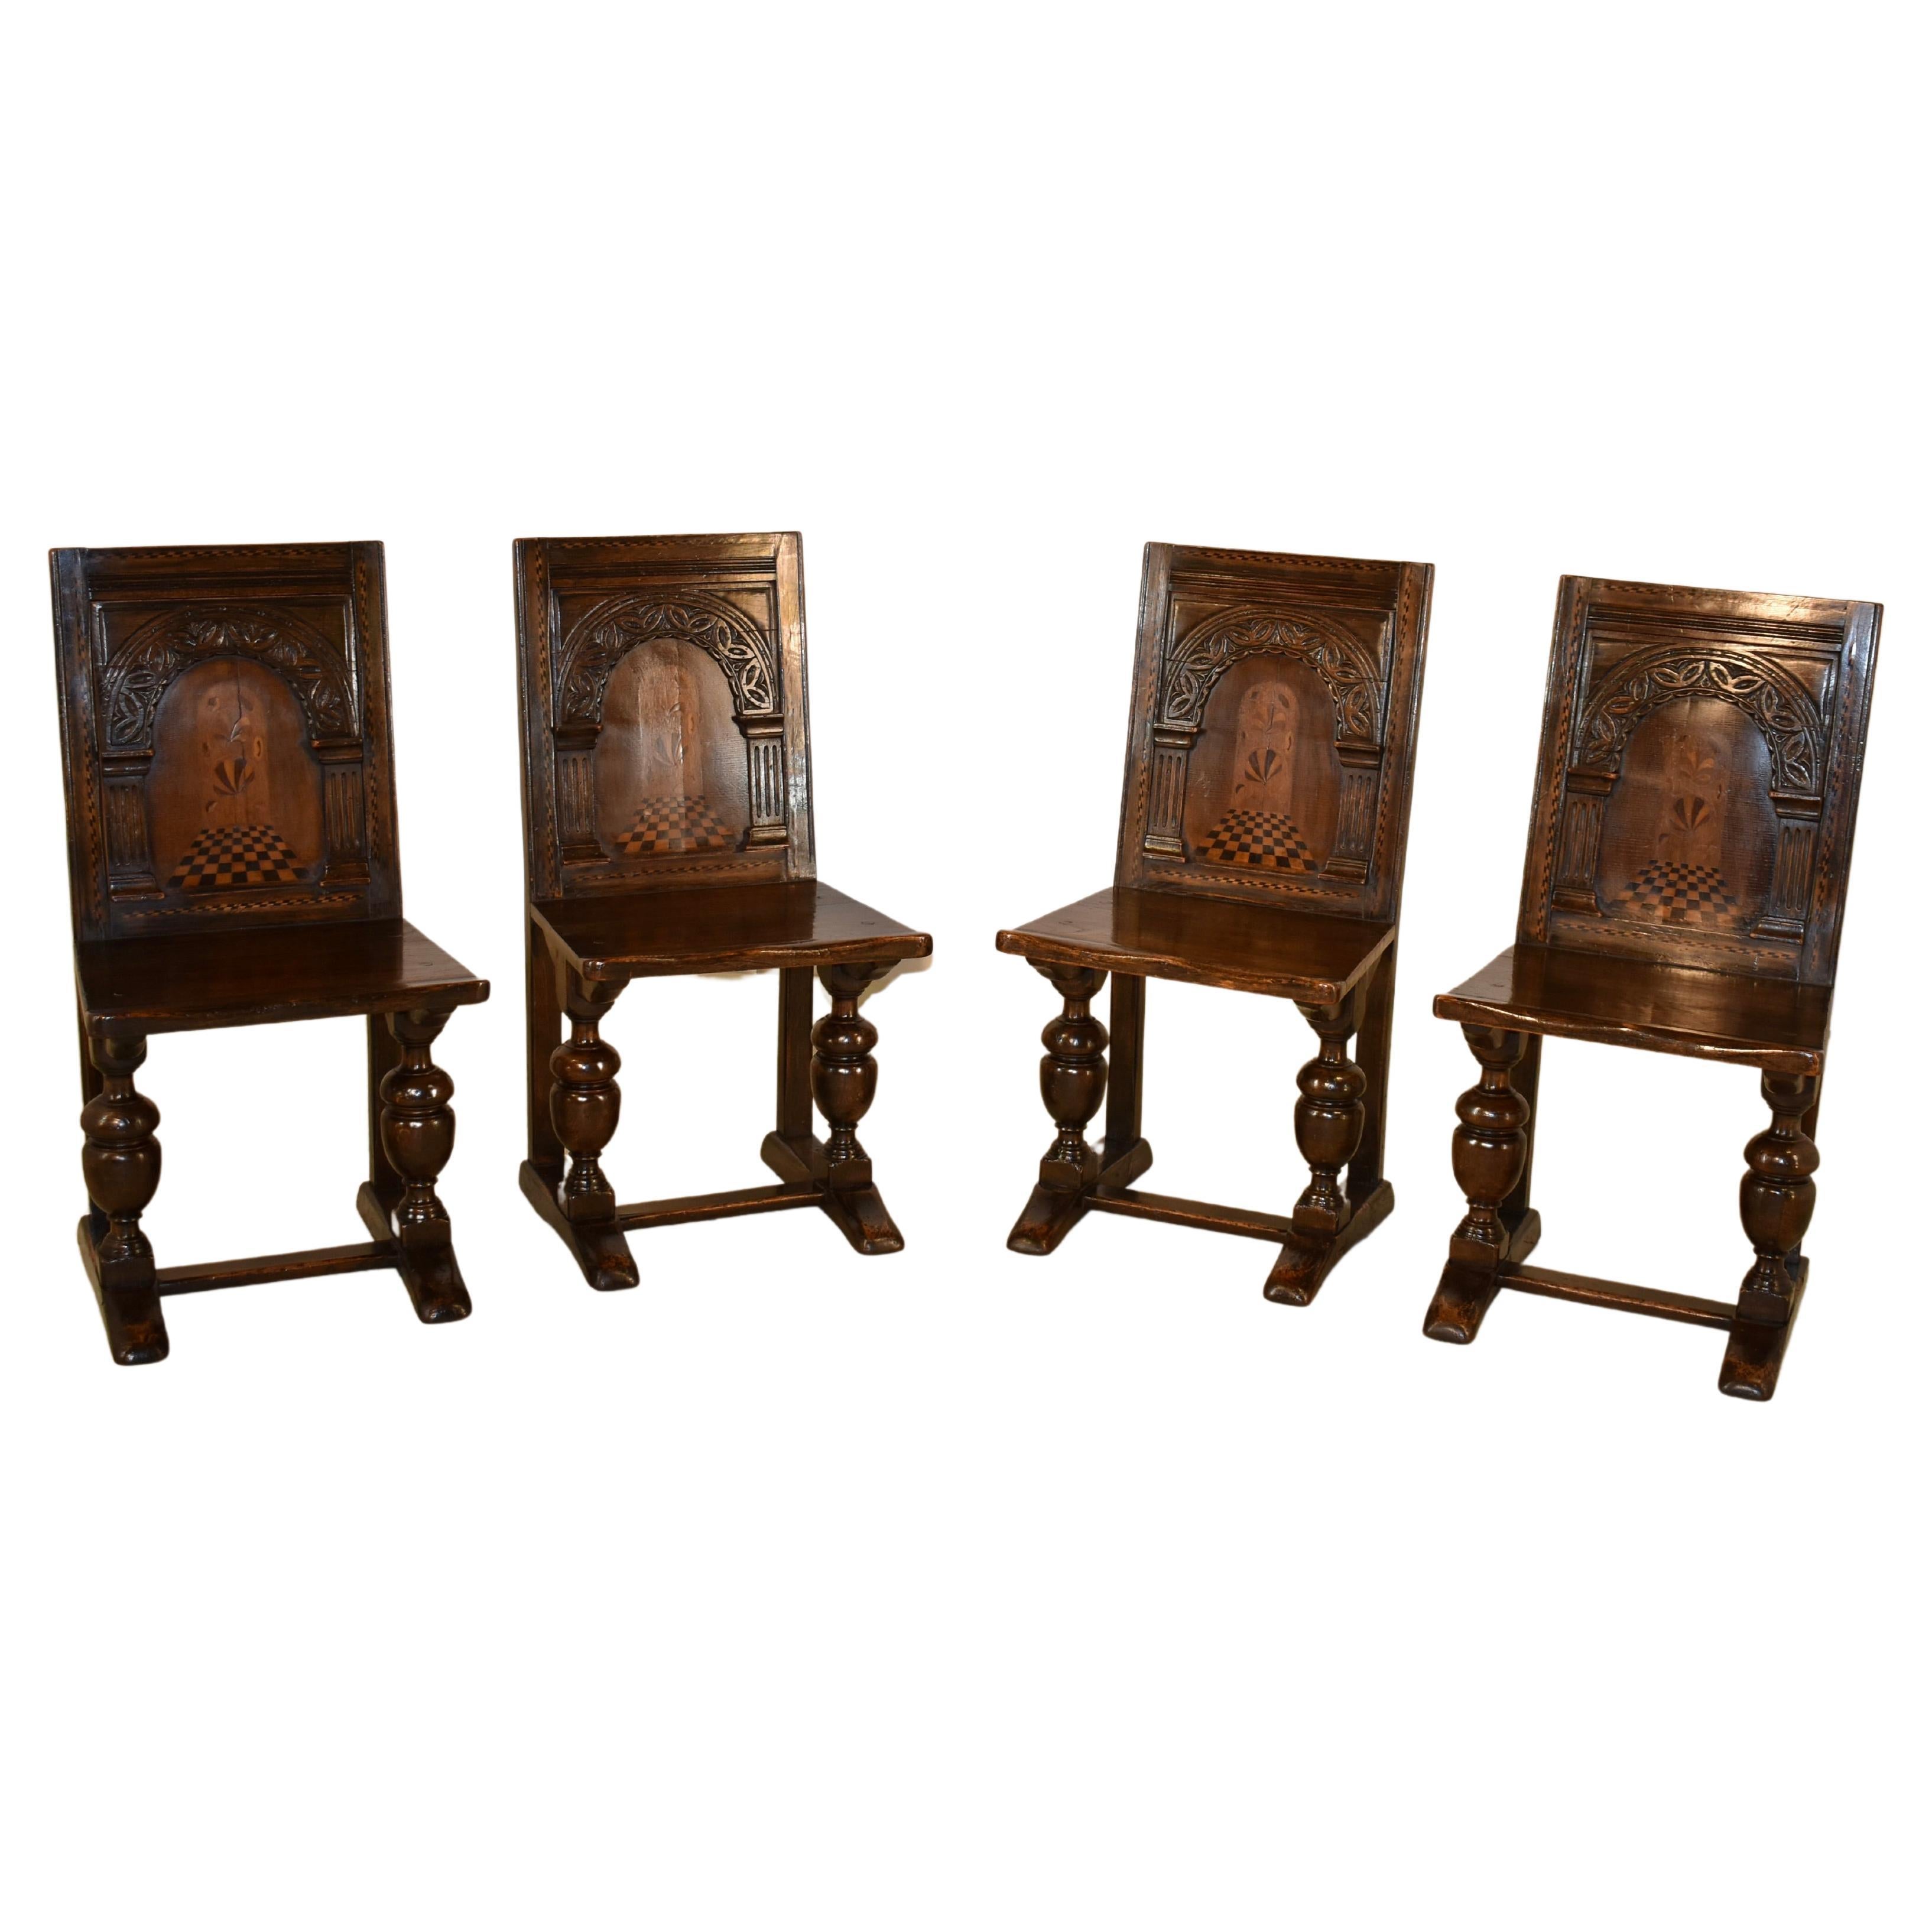 19th Century Set of 4 English Oak Parquetry Chairs For Sale